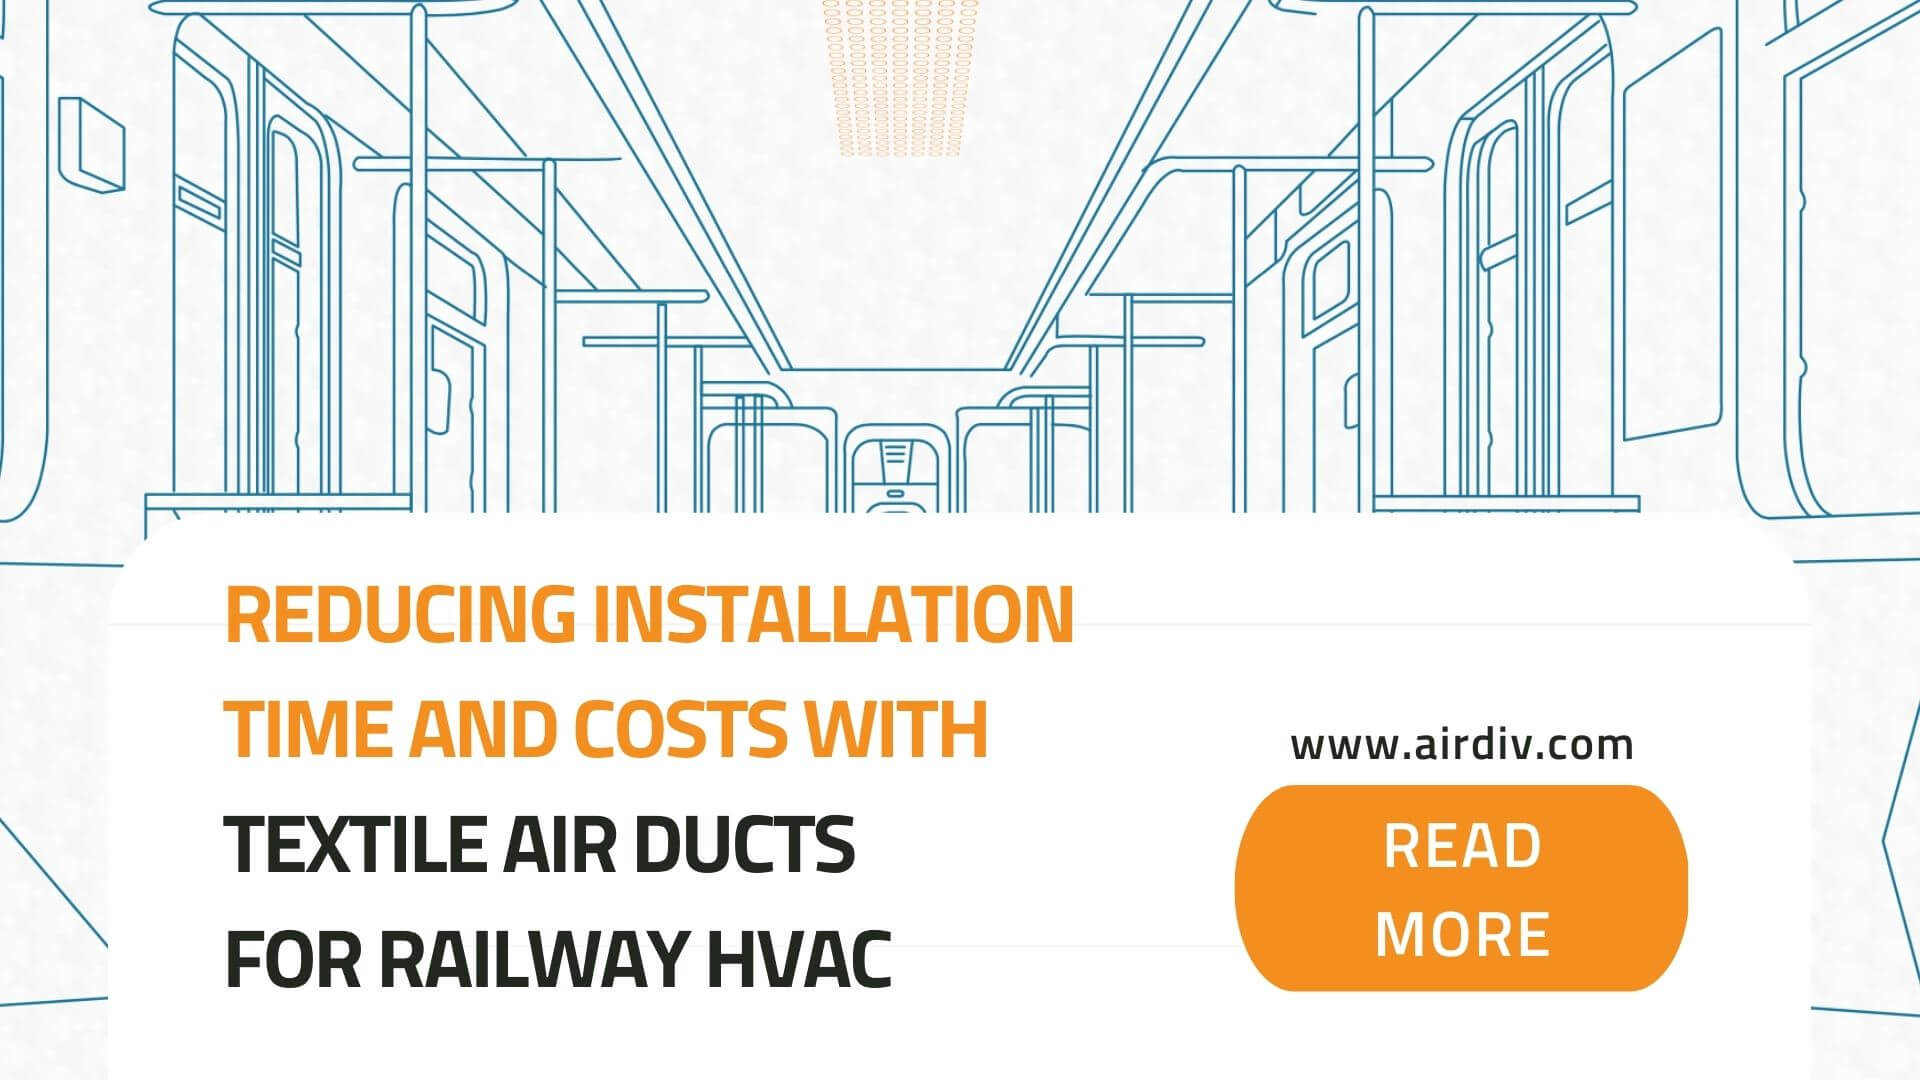 Reducing Installation Time and Costs with Textile Air Ducts for Railway HVAC Cost-Effective Railway HVAC Solutions: The Impact of Air Ducts